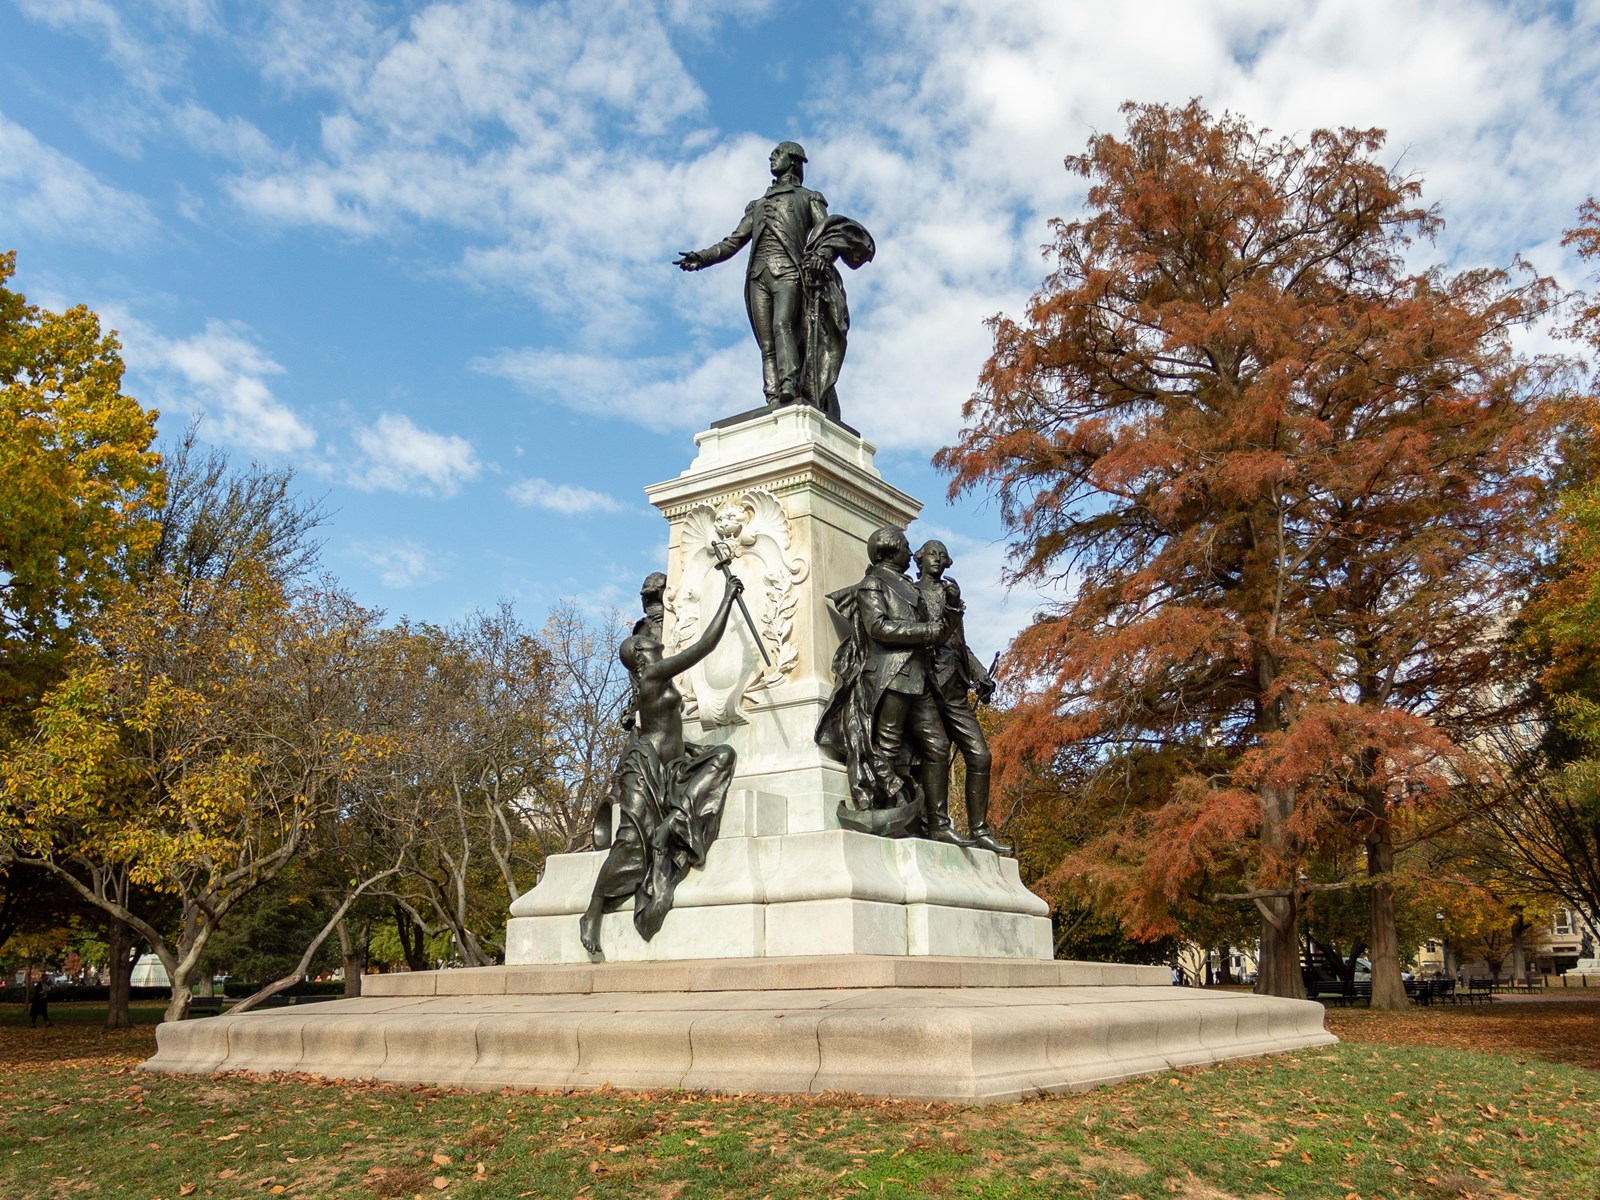 A bronze statue of Lafayette standing with hand outstretched. Other figures stand at the base.